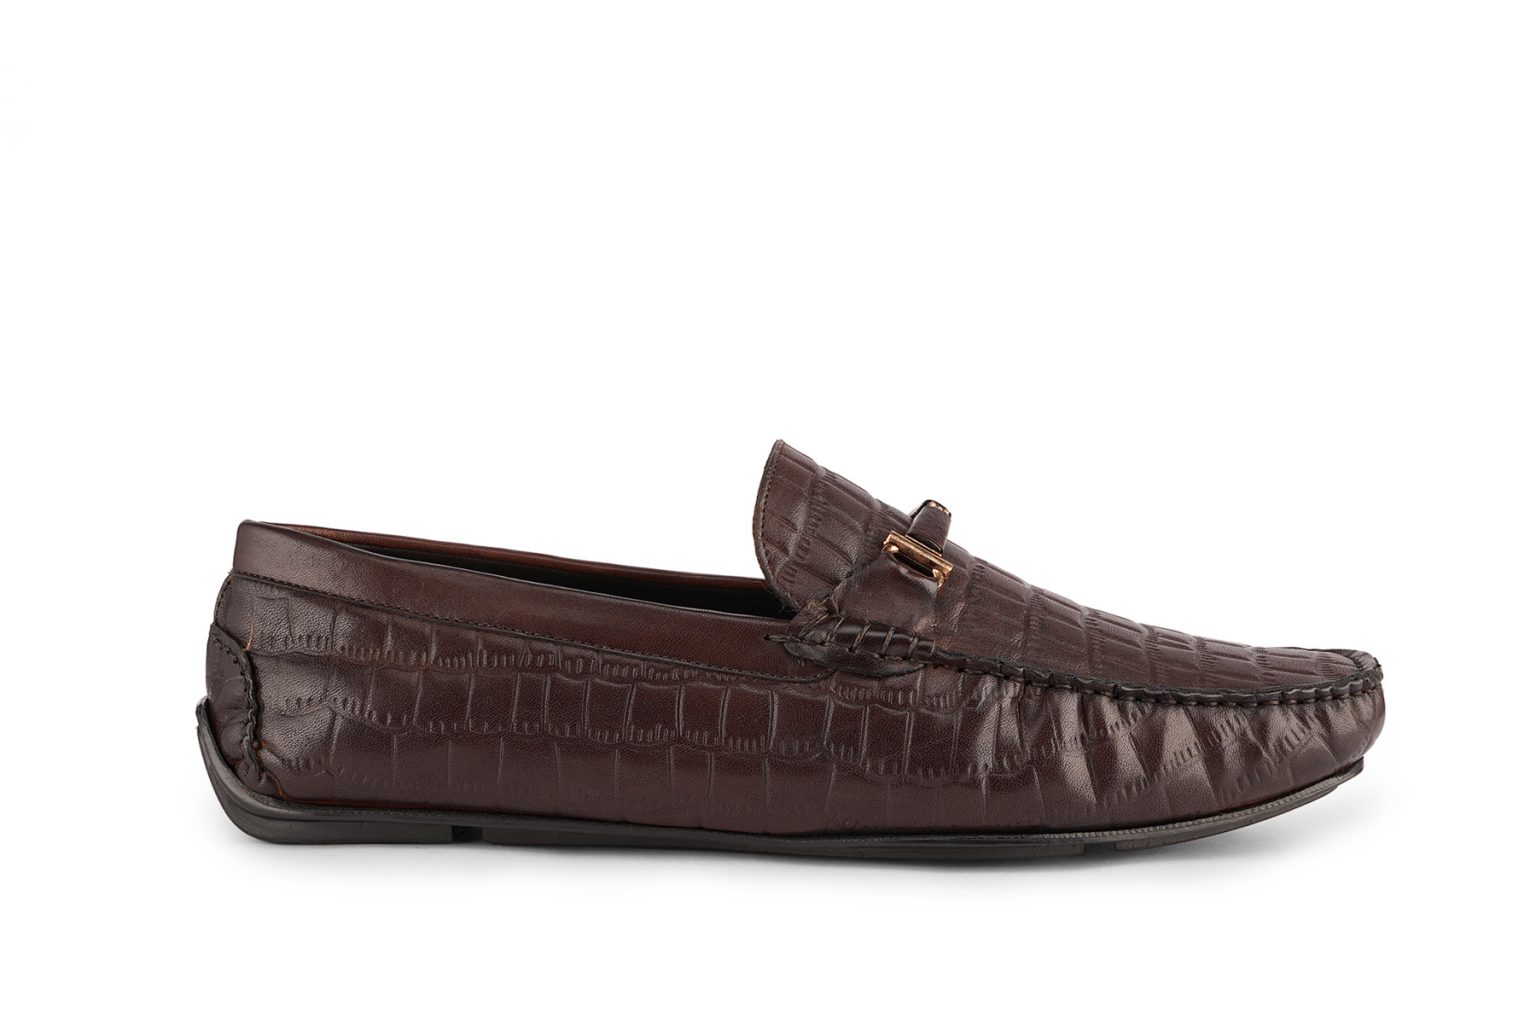 Loafers » Cordwainers - Cordwainers